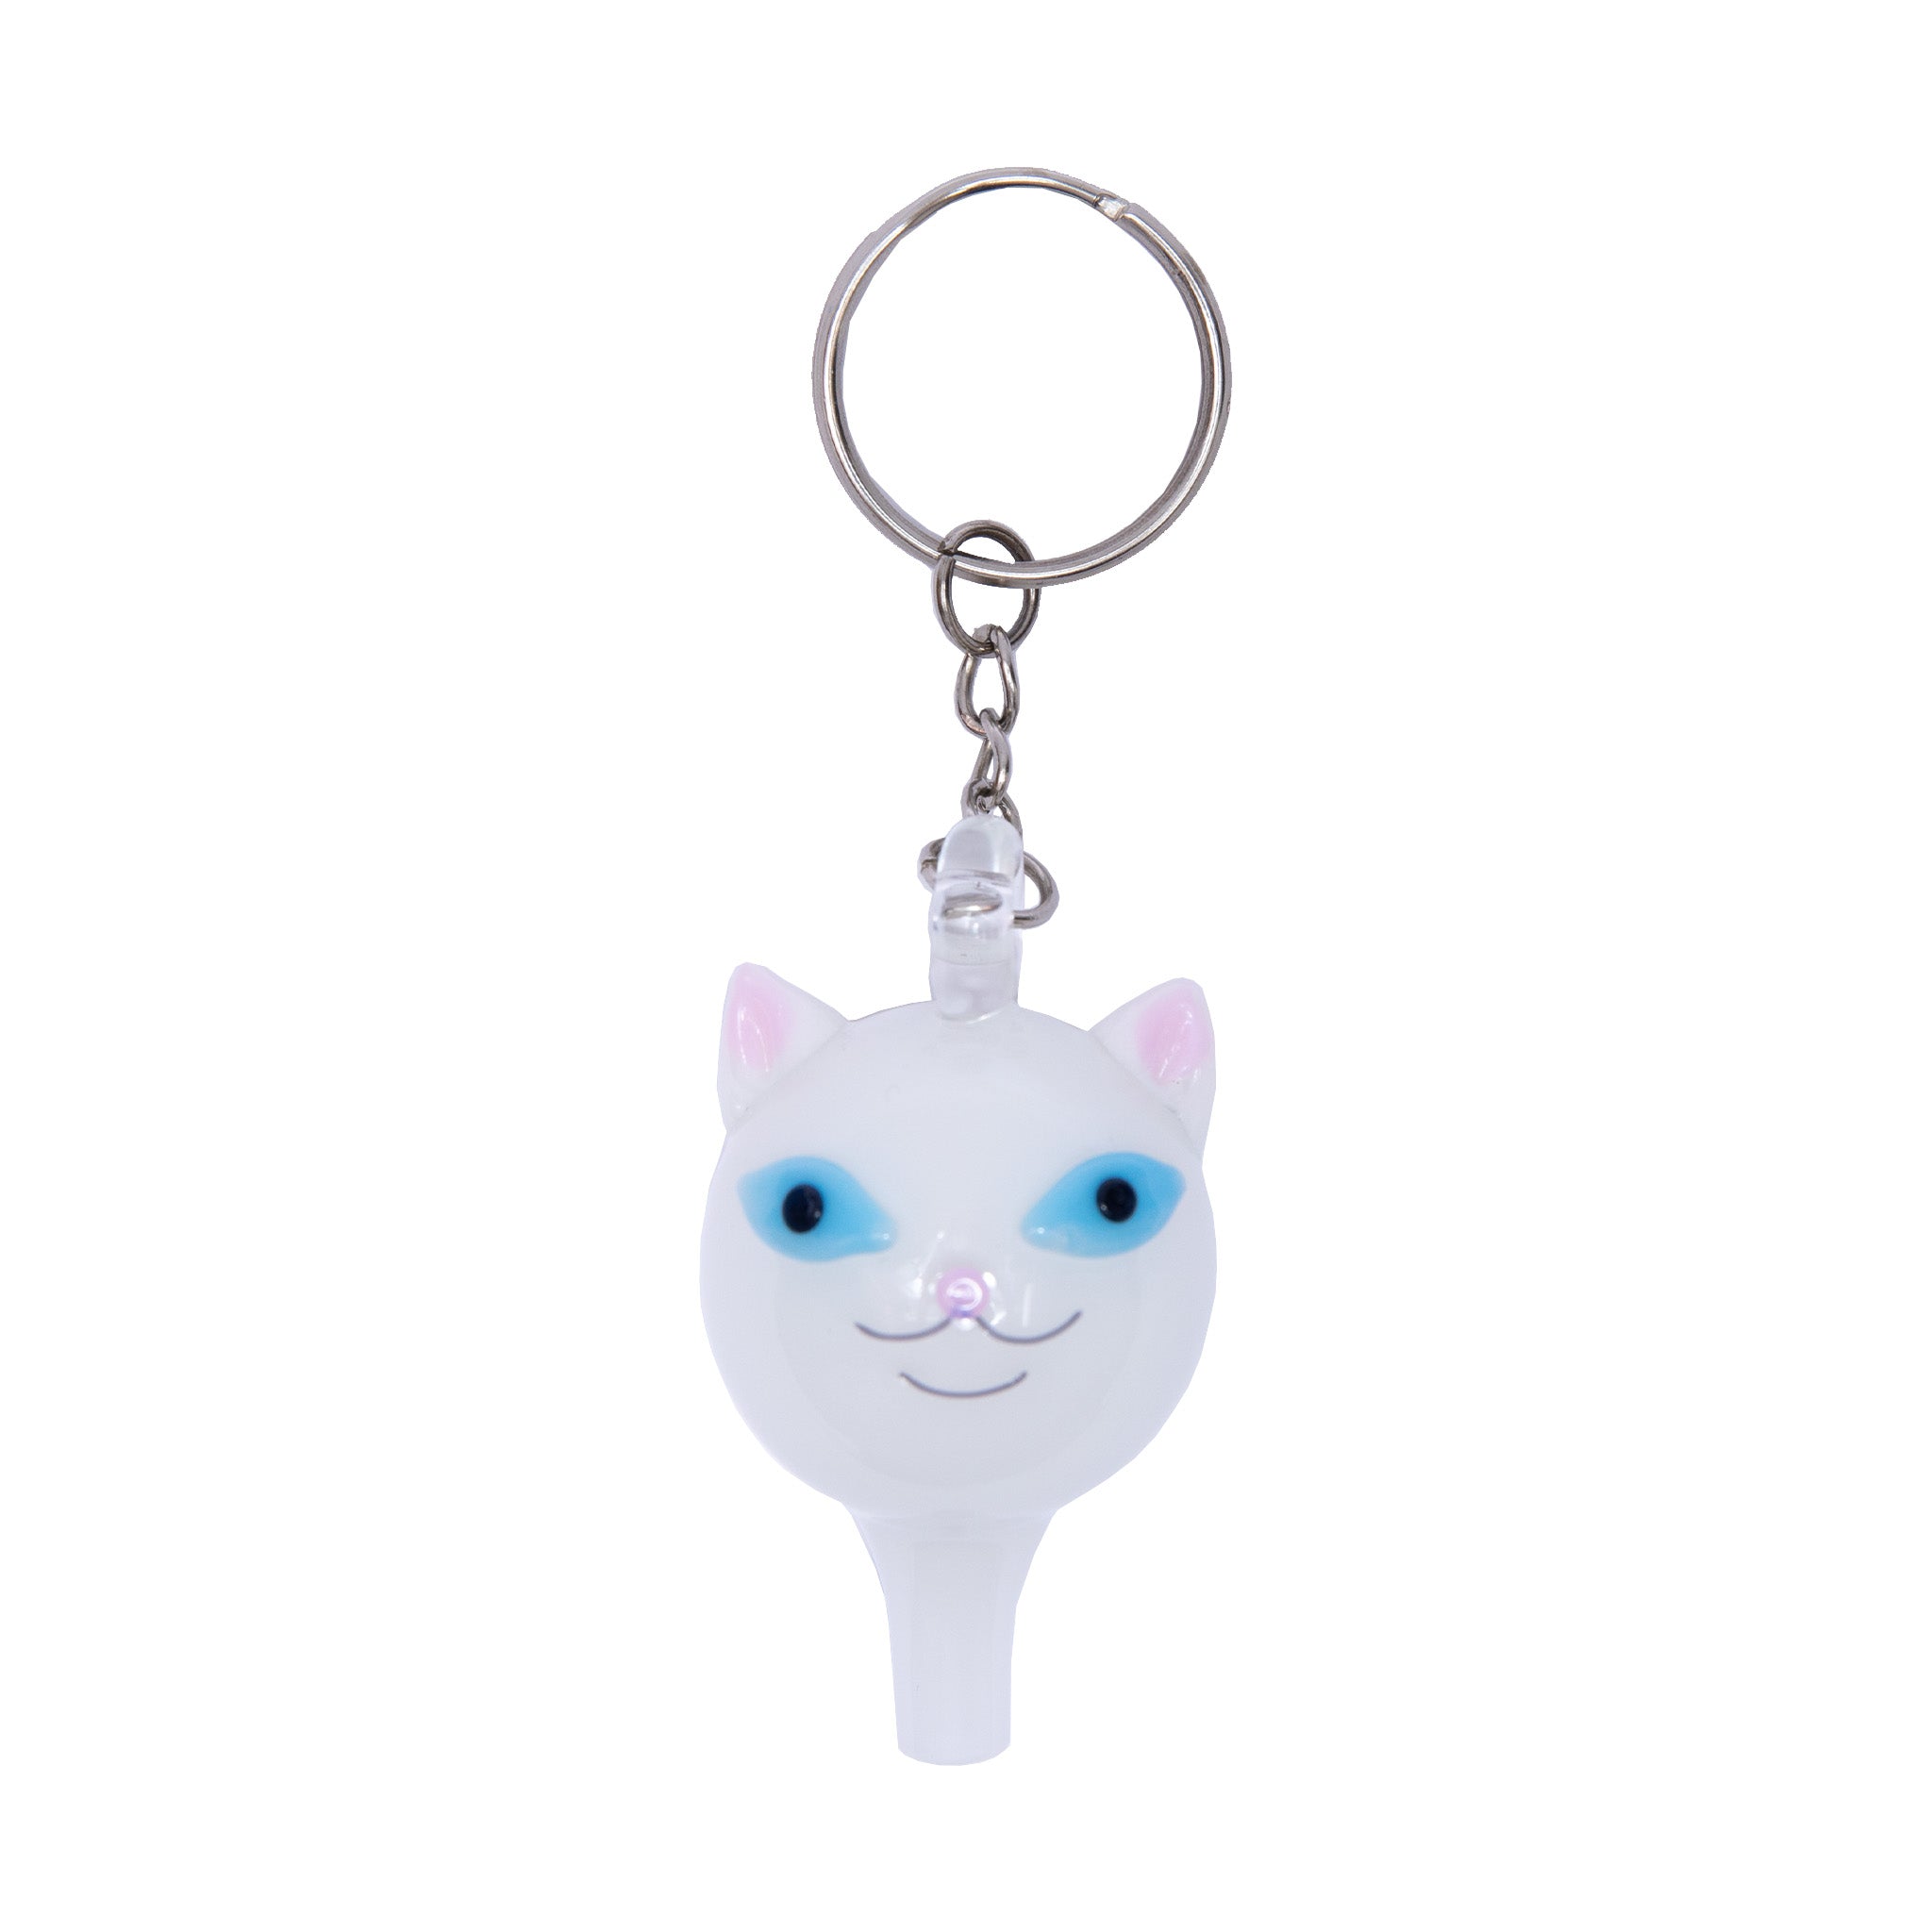 Lord Nermal Glass Carb Cap Keychain (White)